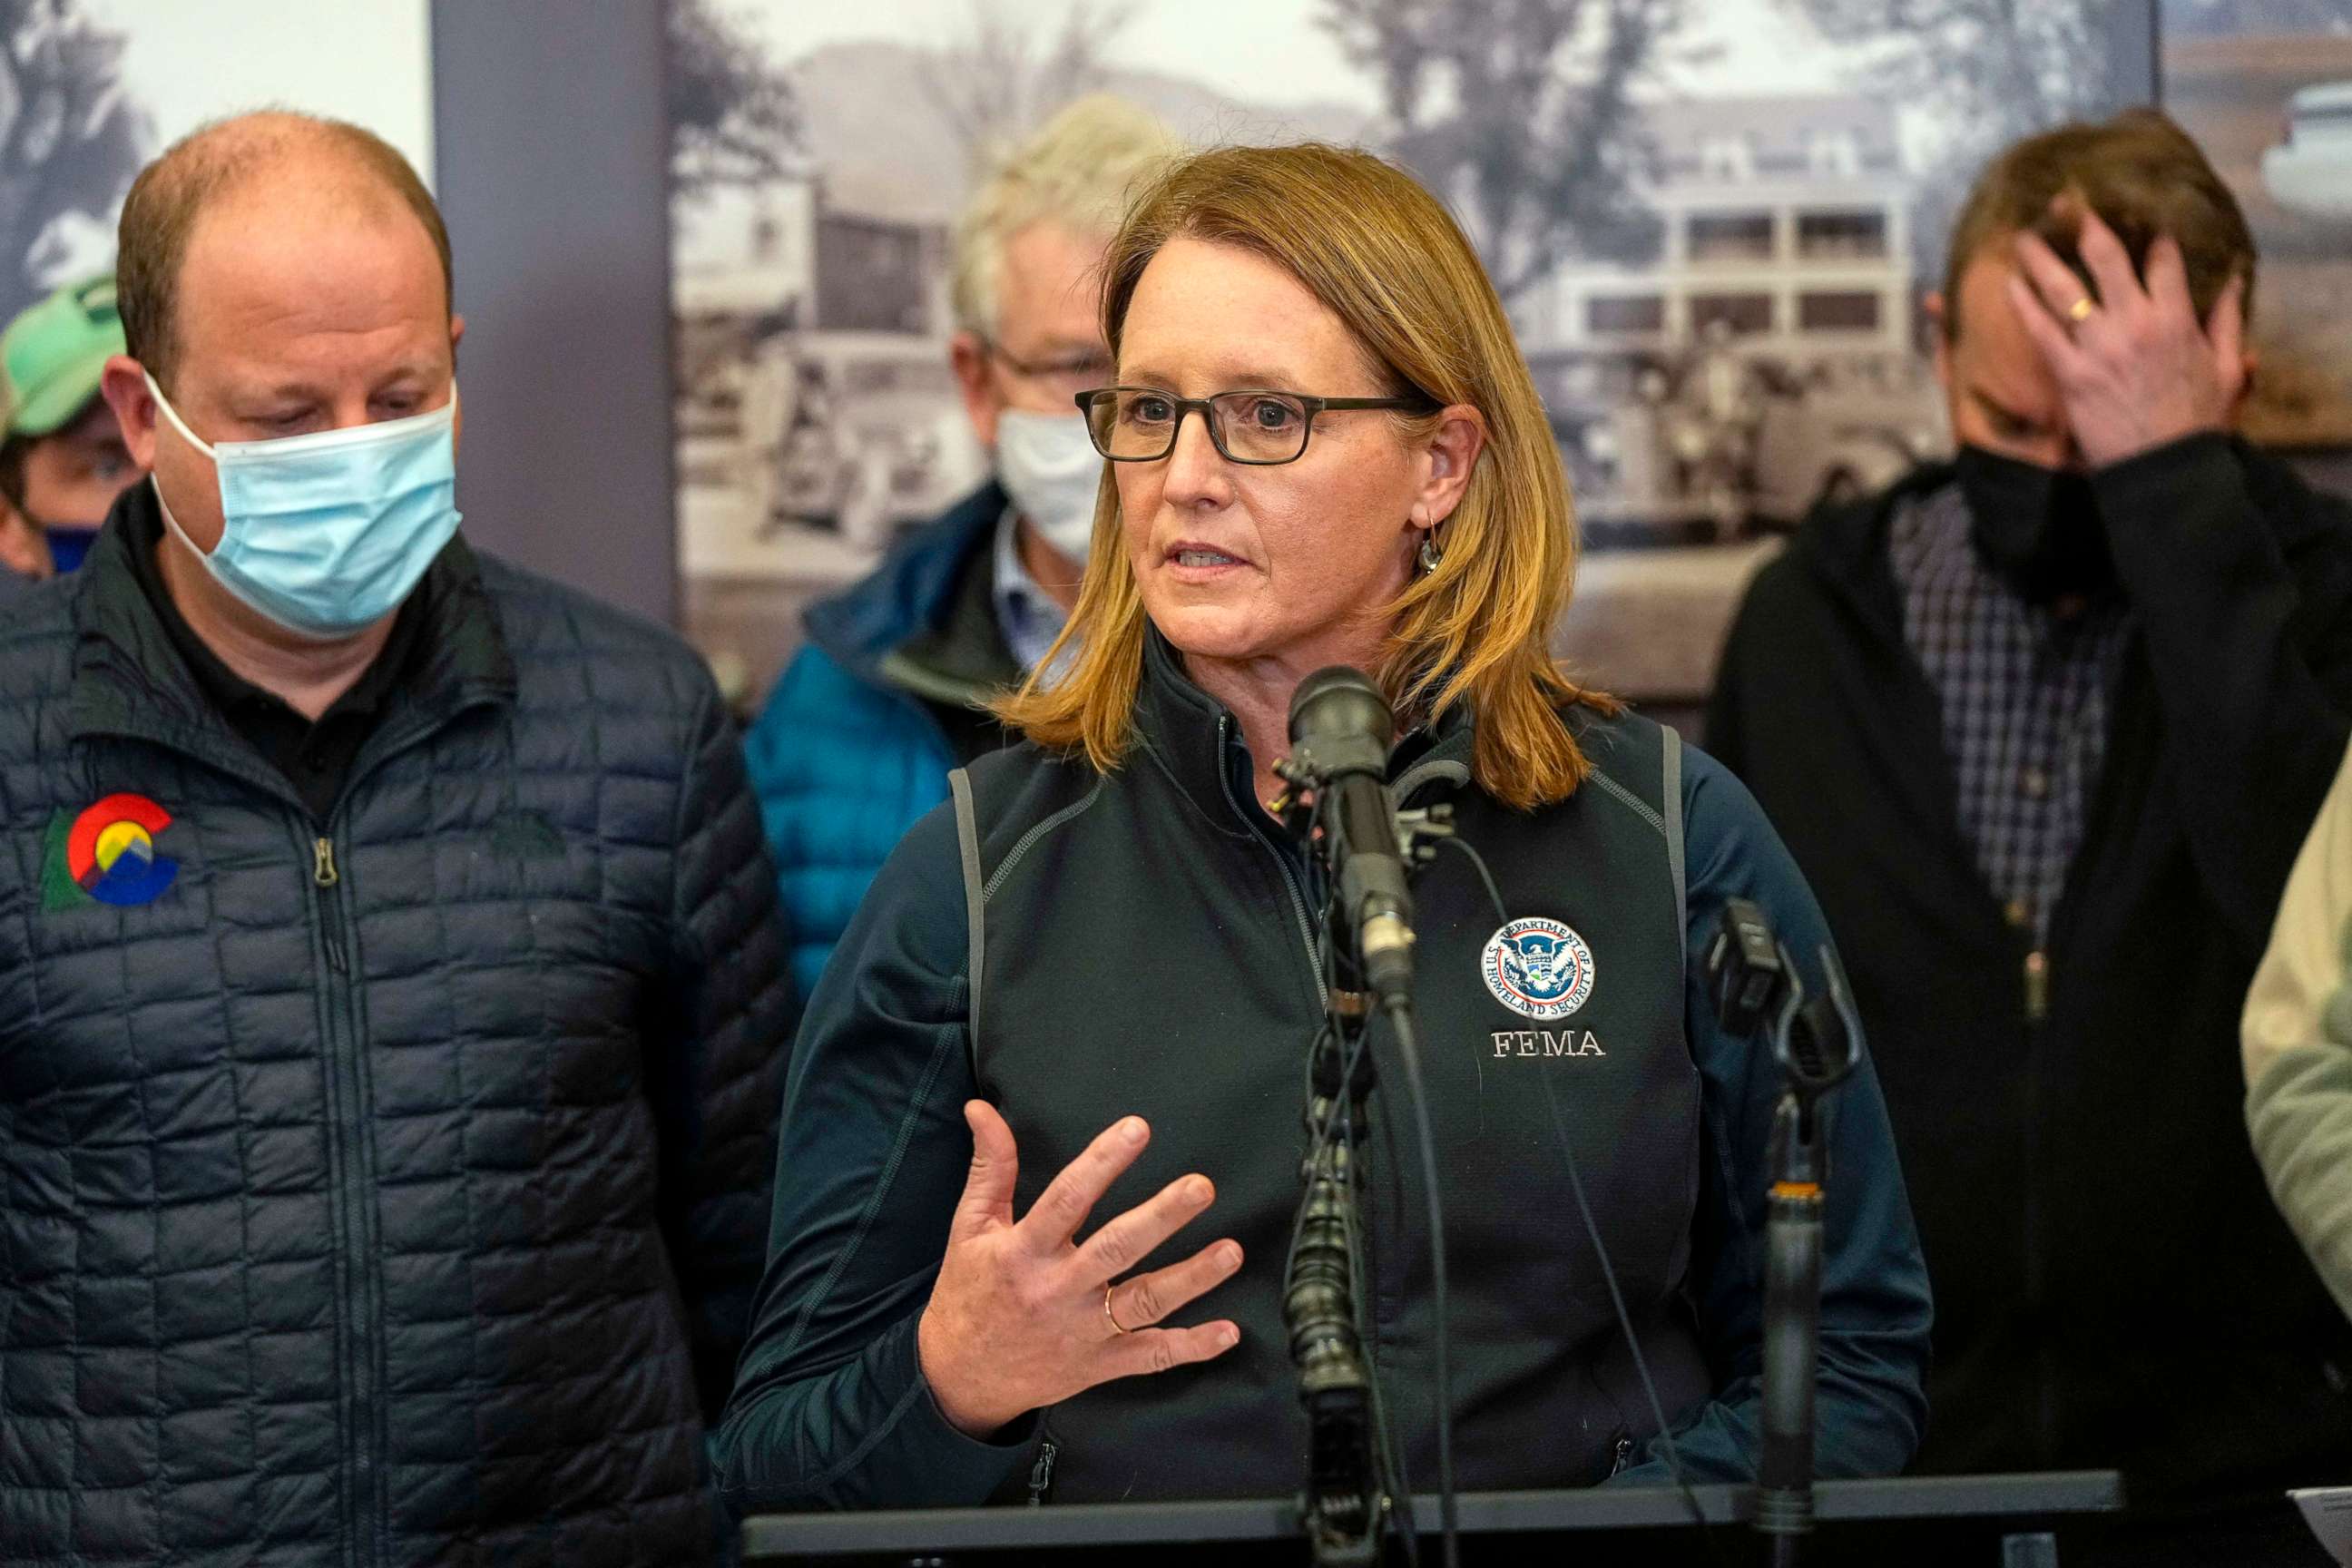 PHOTO: FEMA administrator Deanne Criswell talks during a news conference updating the Colorado wildfire damage after touring the impacted area, Jan. 2, 2022, in Boulder, Colo.